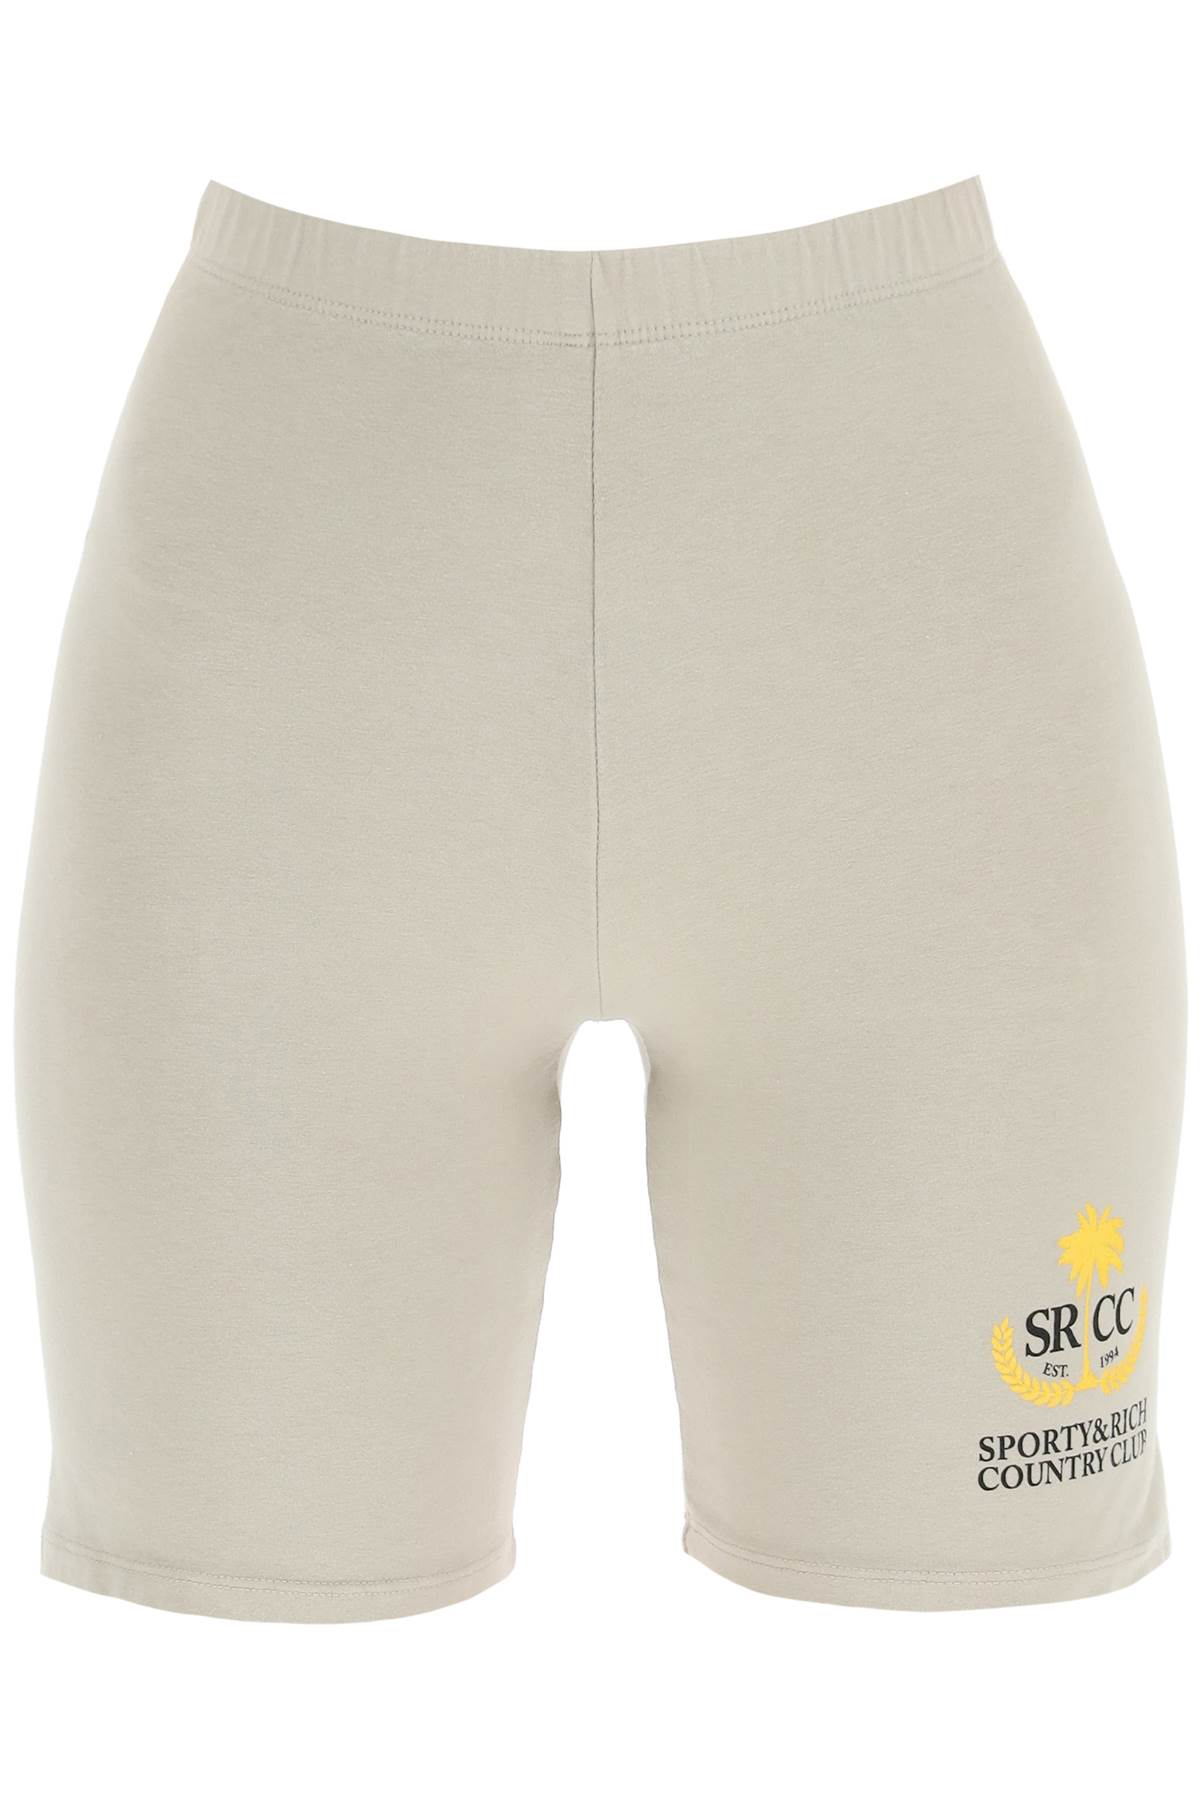 Sporty & Rich Country Club Cycling Shorts